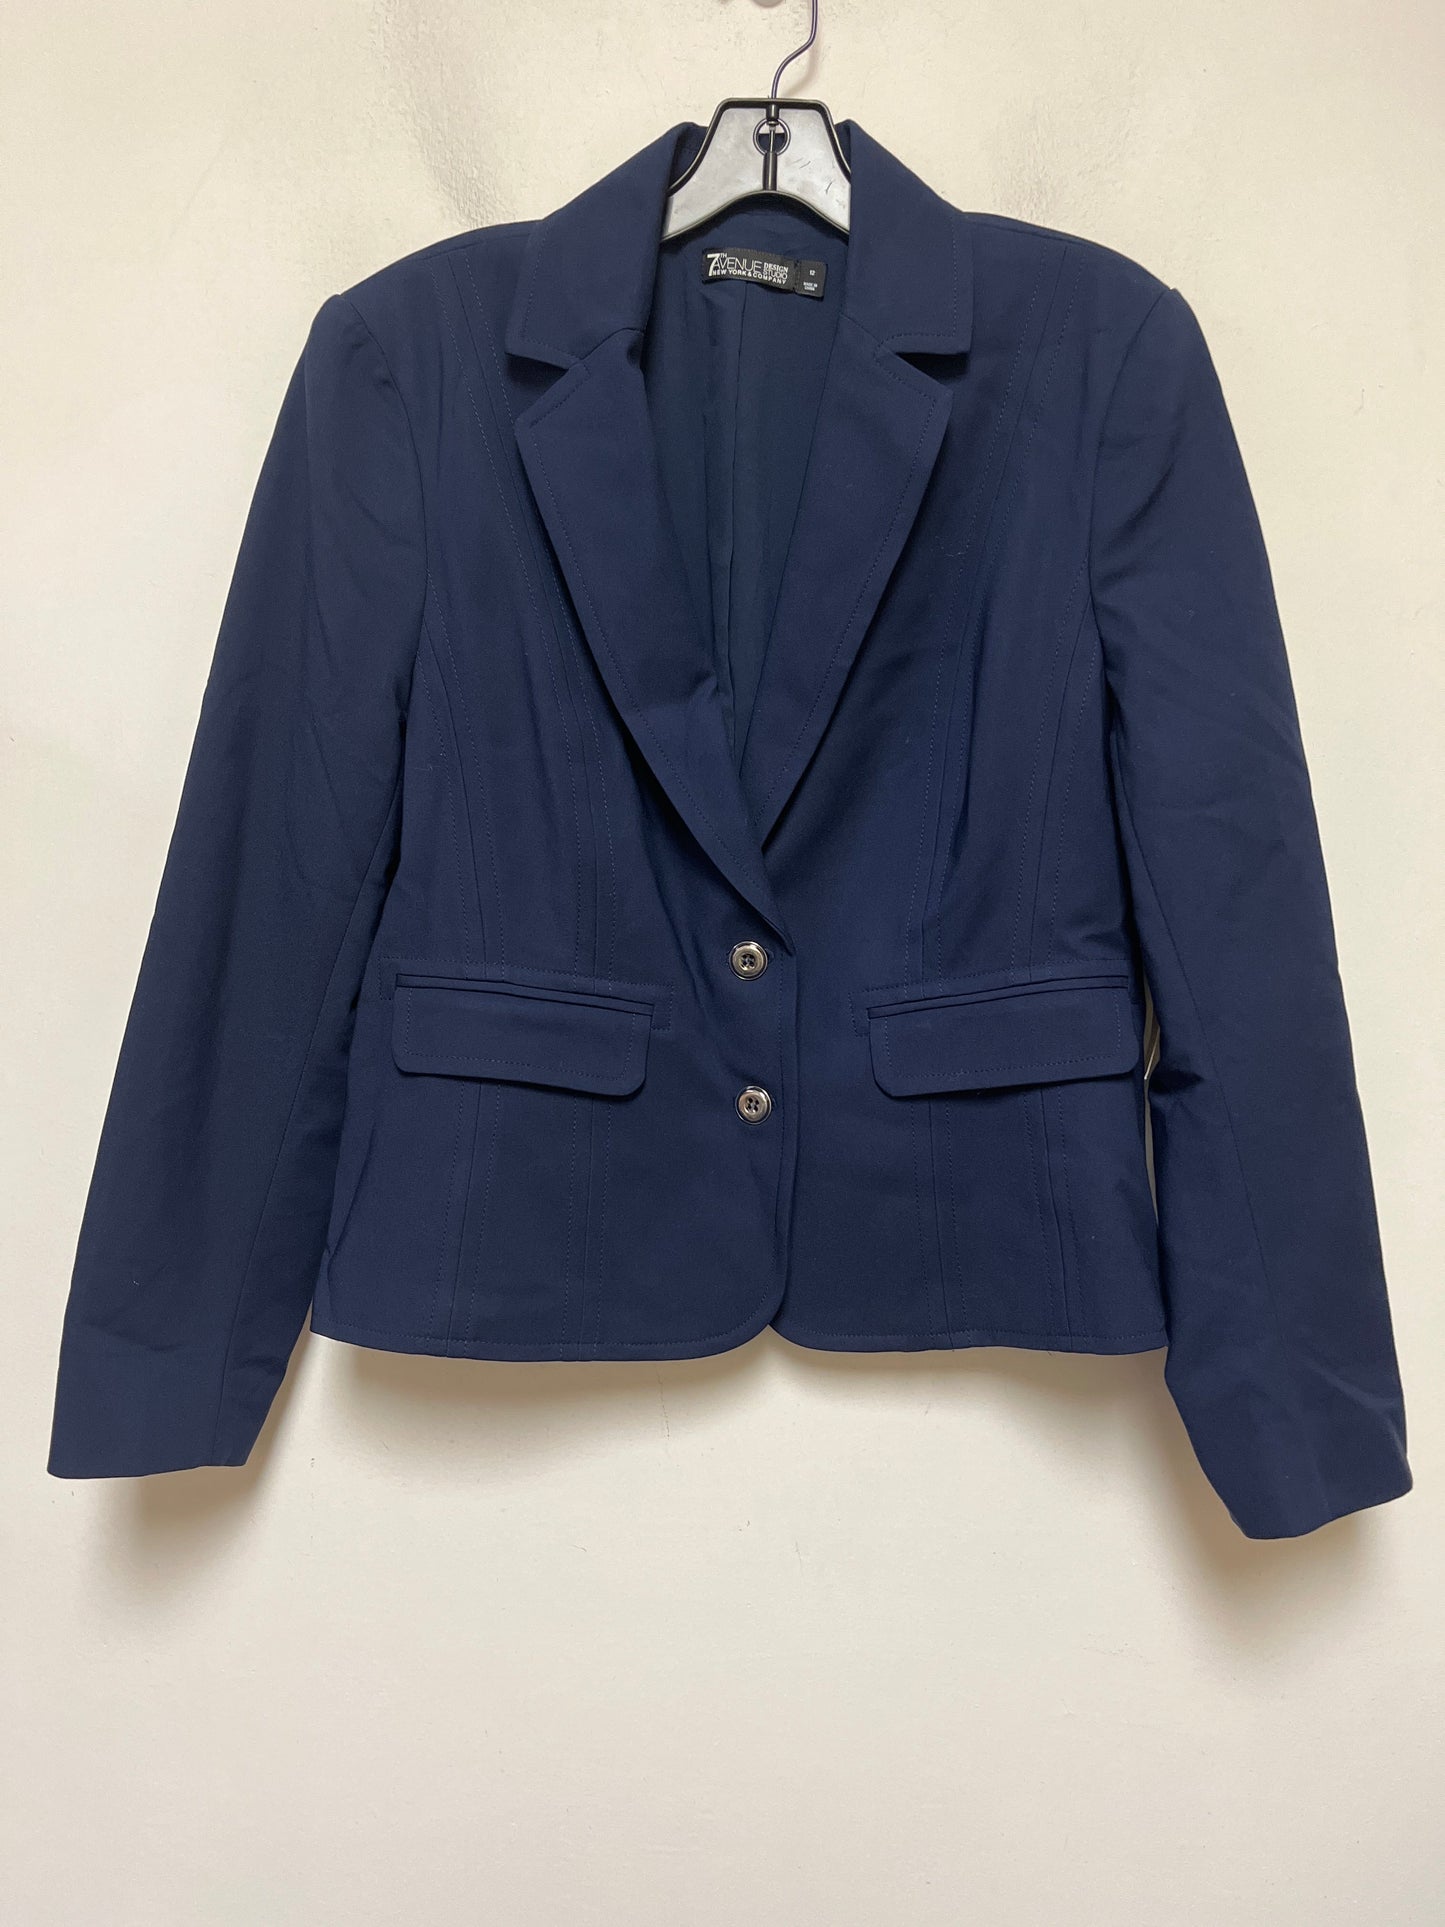 Navy Blazer New York And Co, Size L